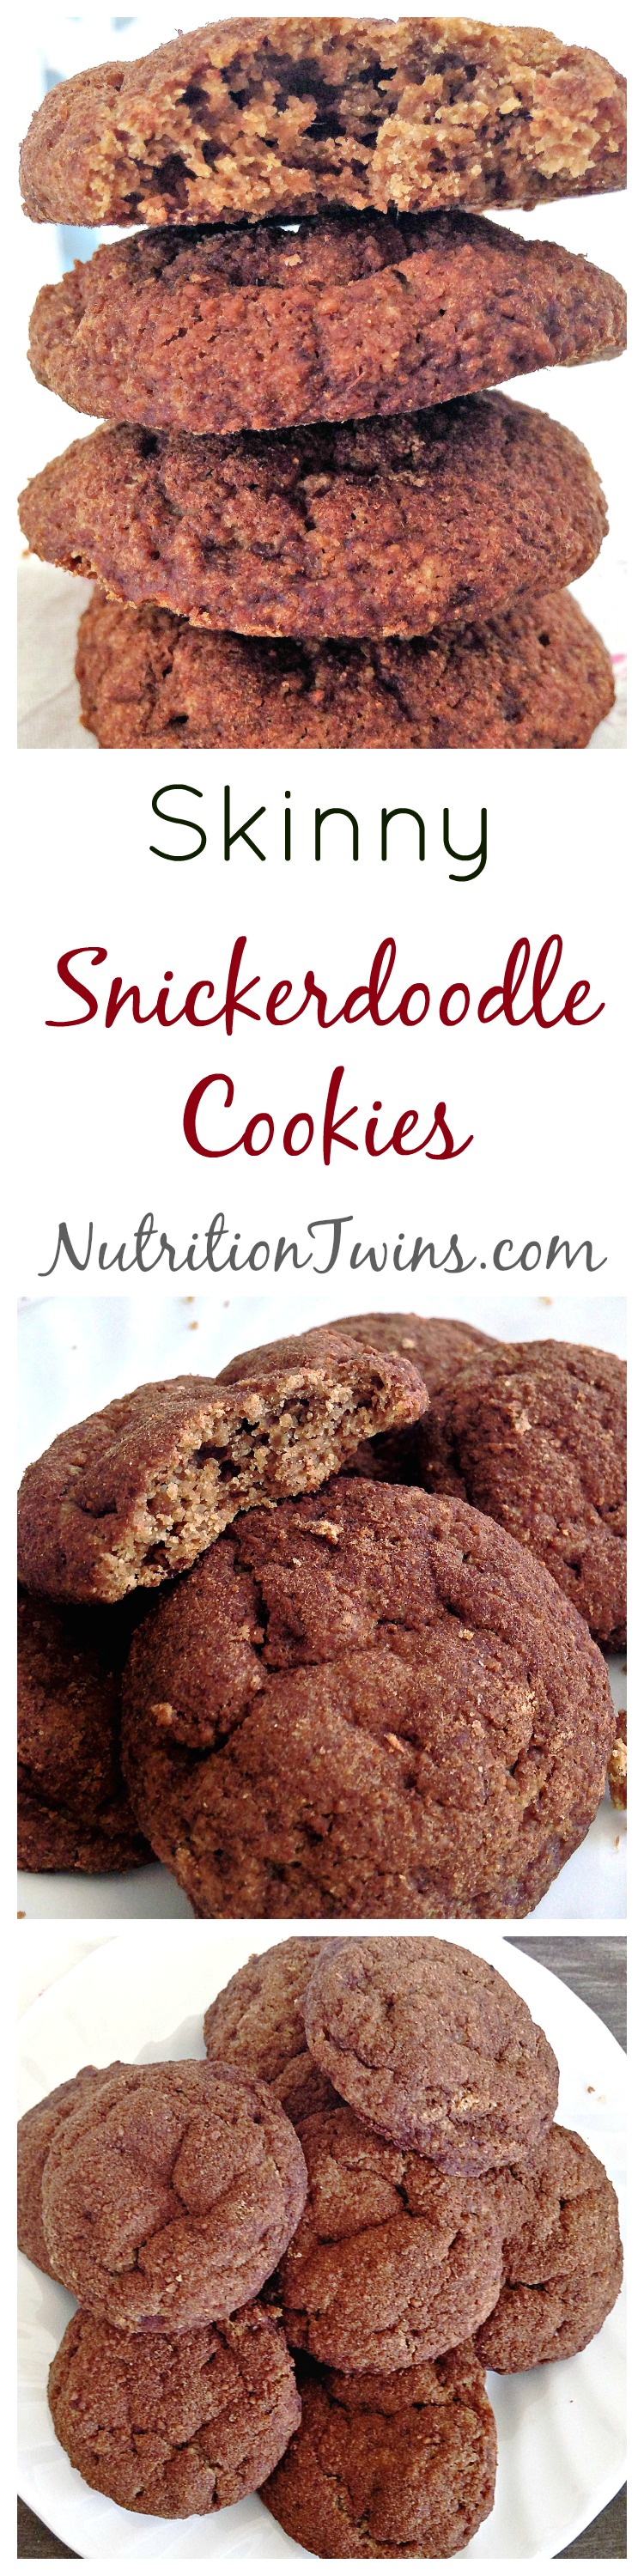 snickerdoodle_cookies_collage